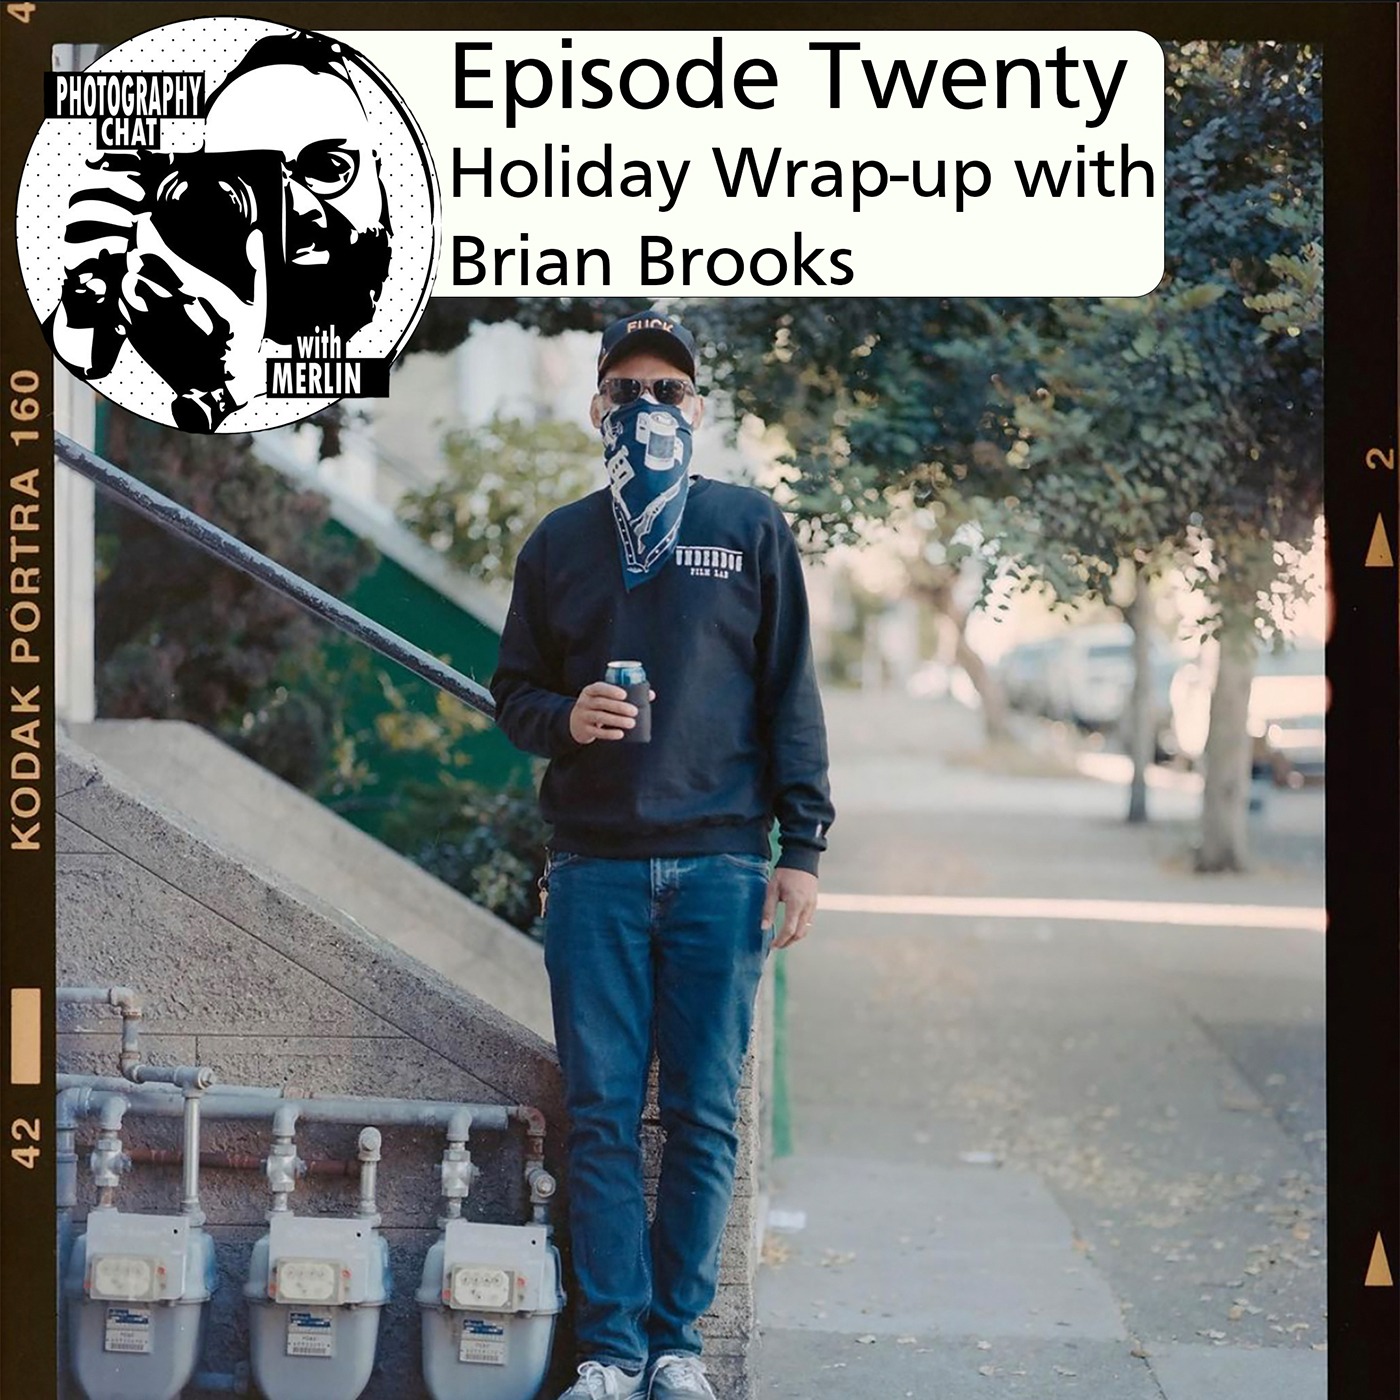 Photography Chat ep.20 Holiday Wrap-up with Brian Brooks